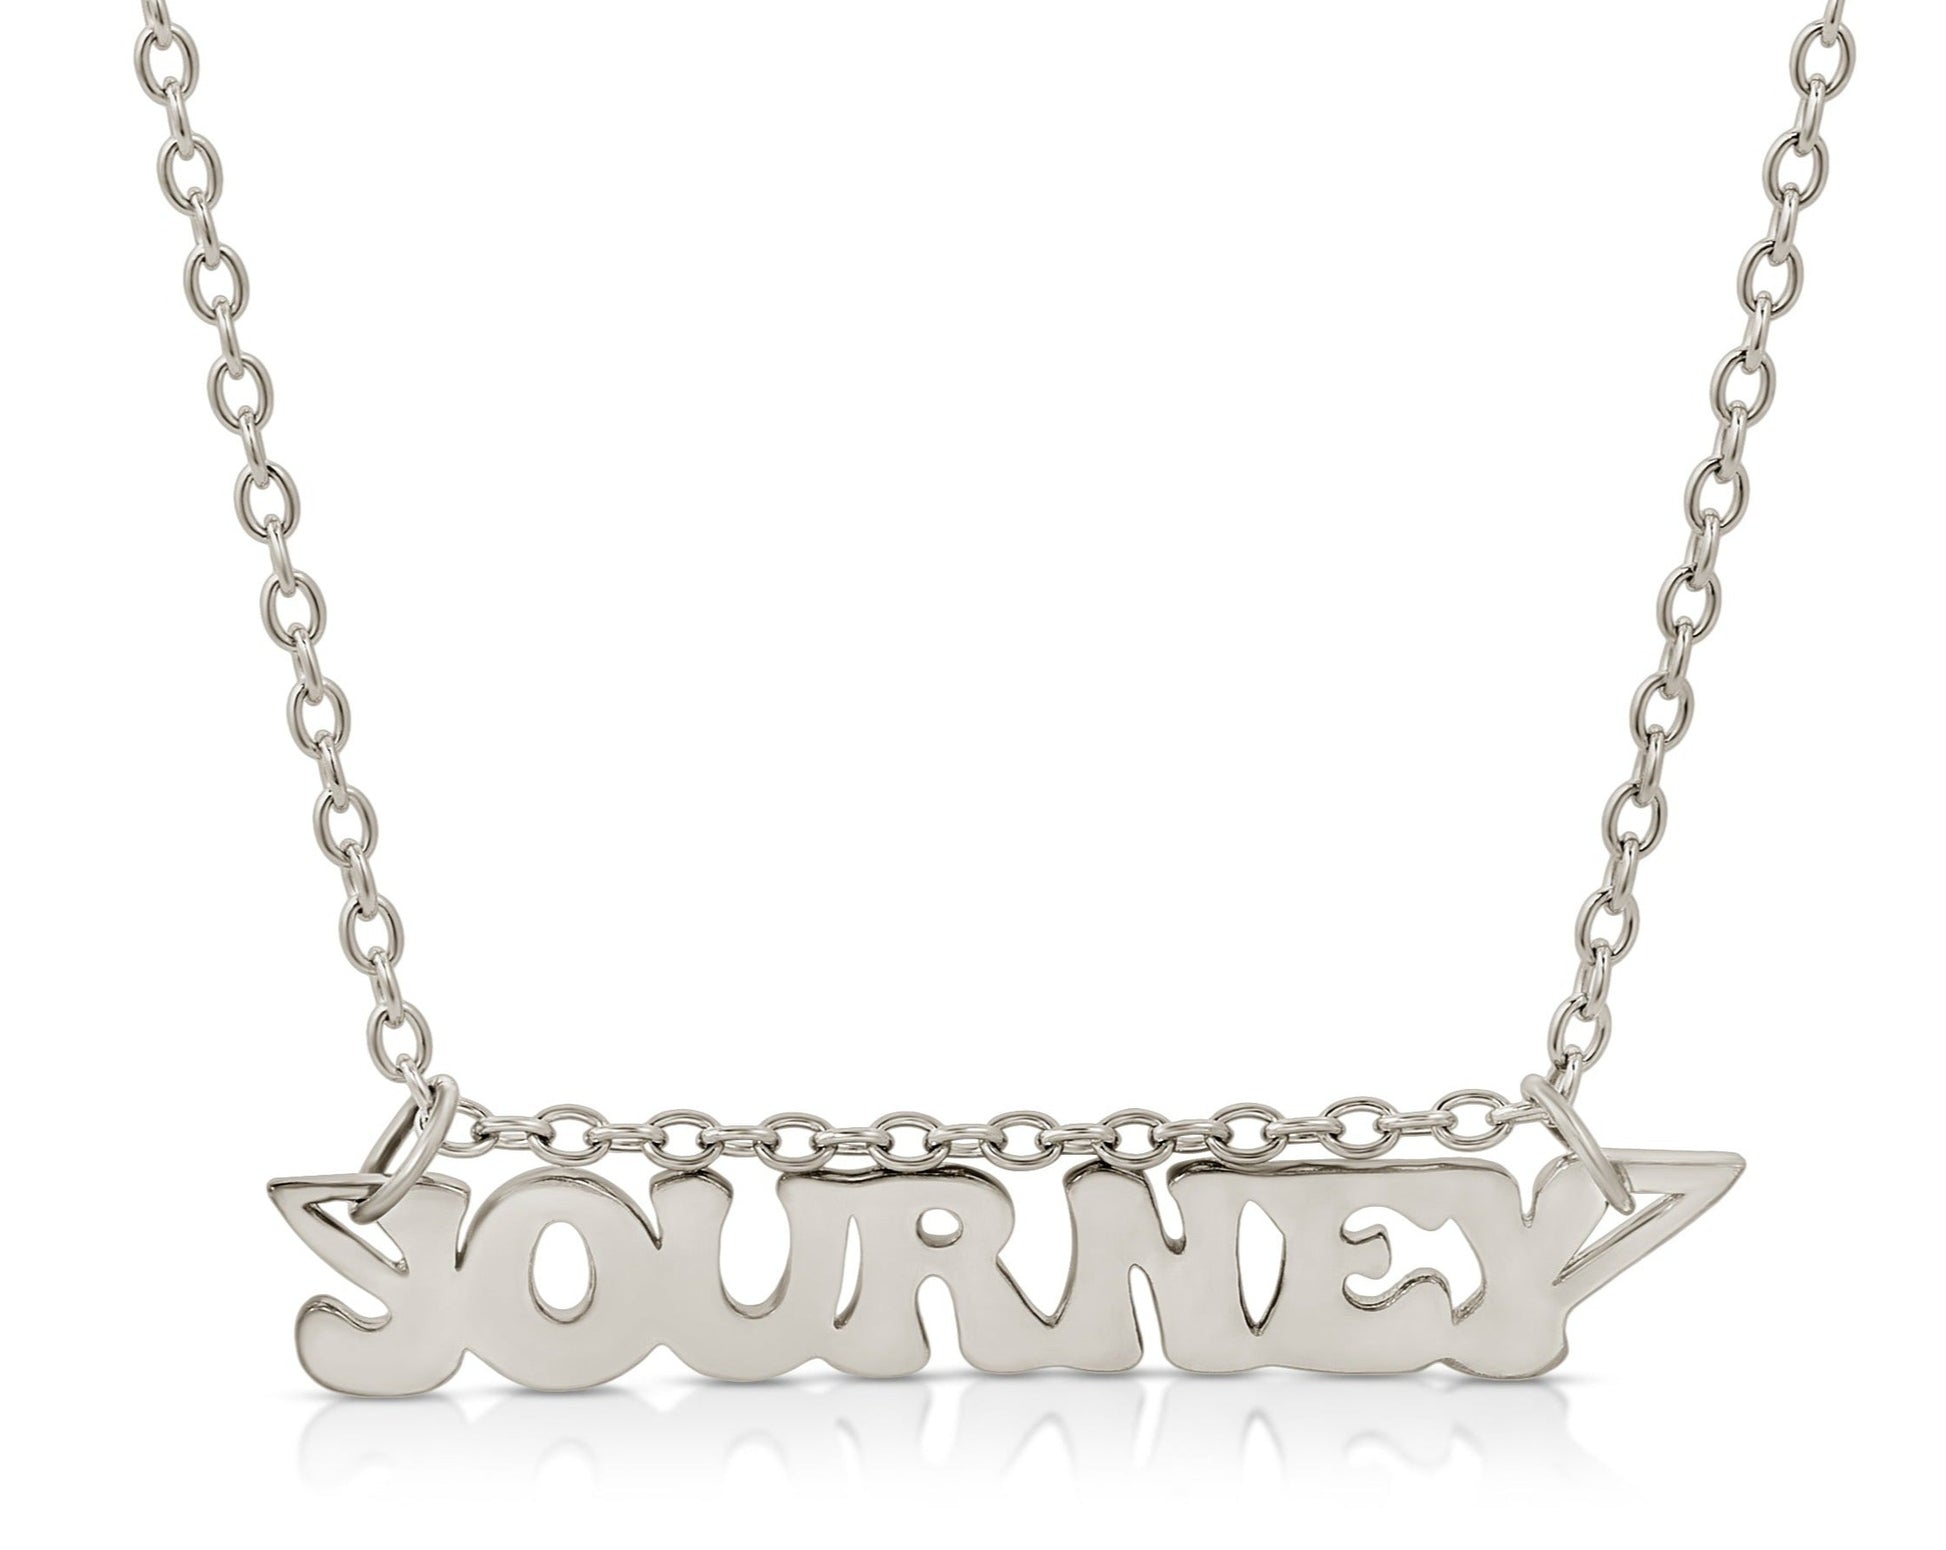 18K solid gold white gold necklace that says journey